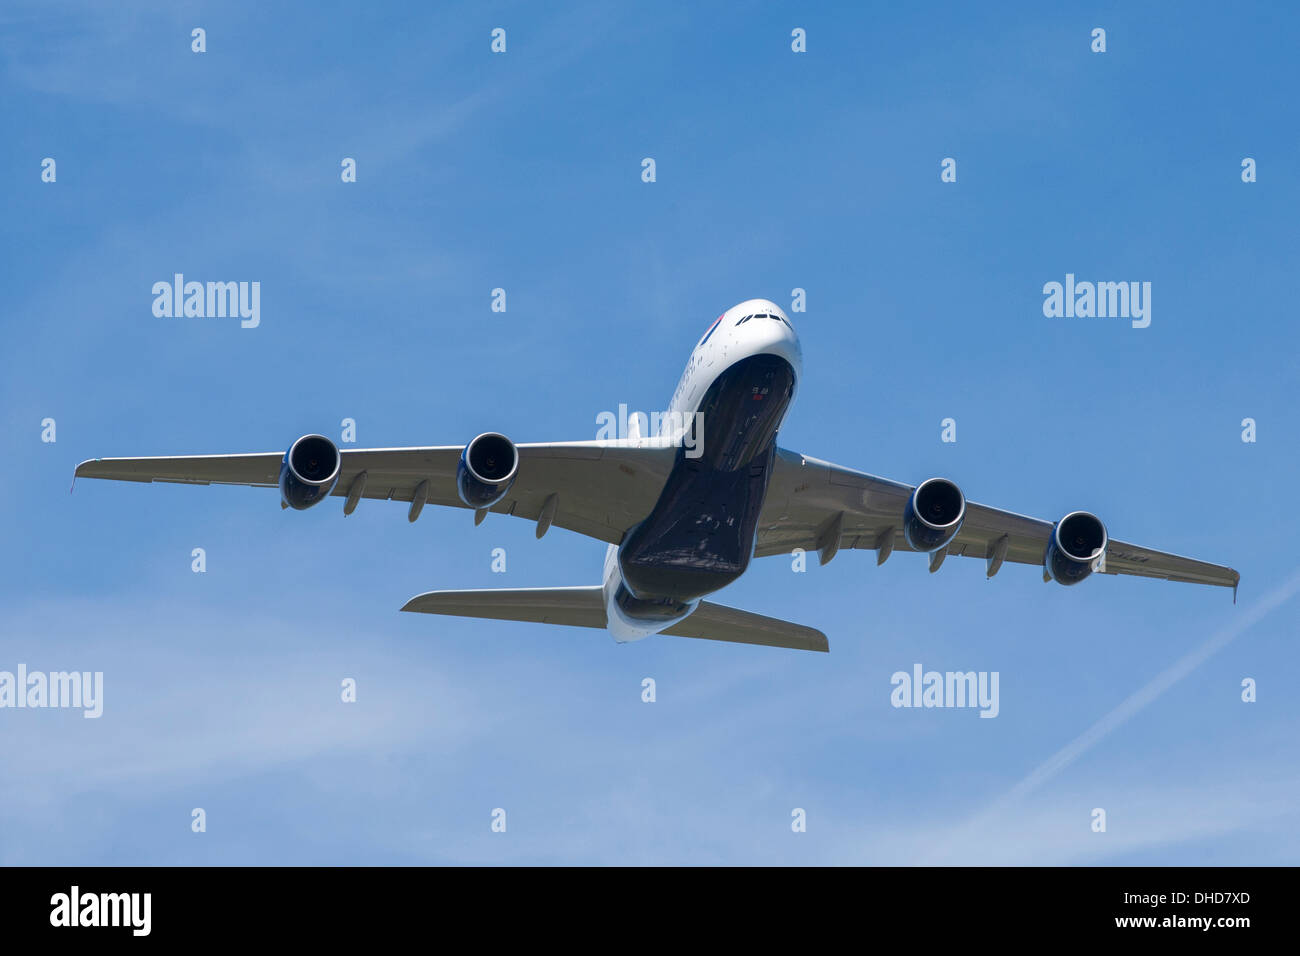 Airbus A380 Aircraft passenger airliner coming in to land against blue sky and wispy clouds. Stock Photo